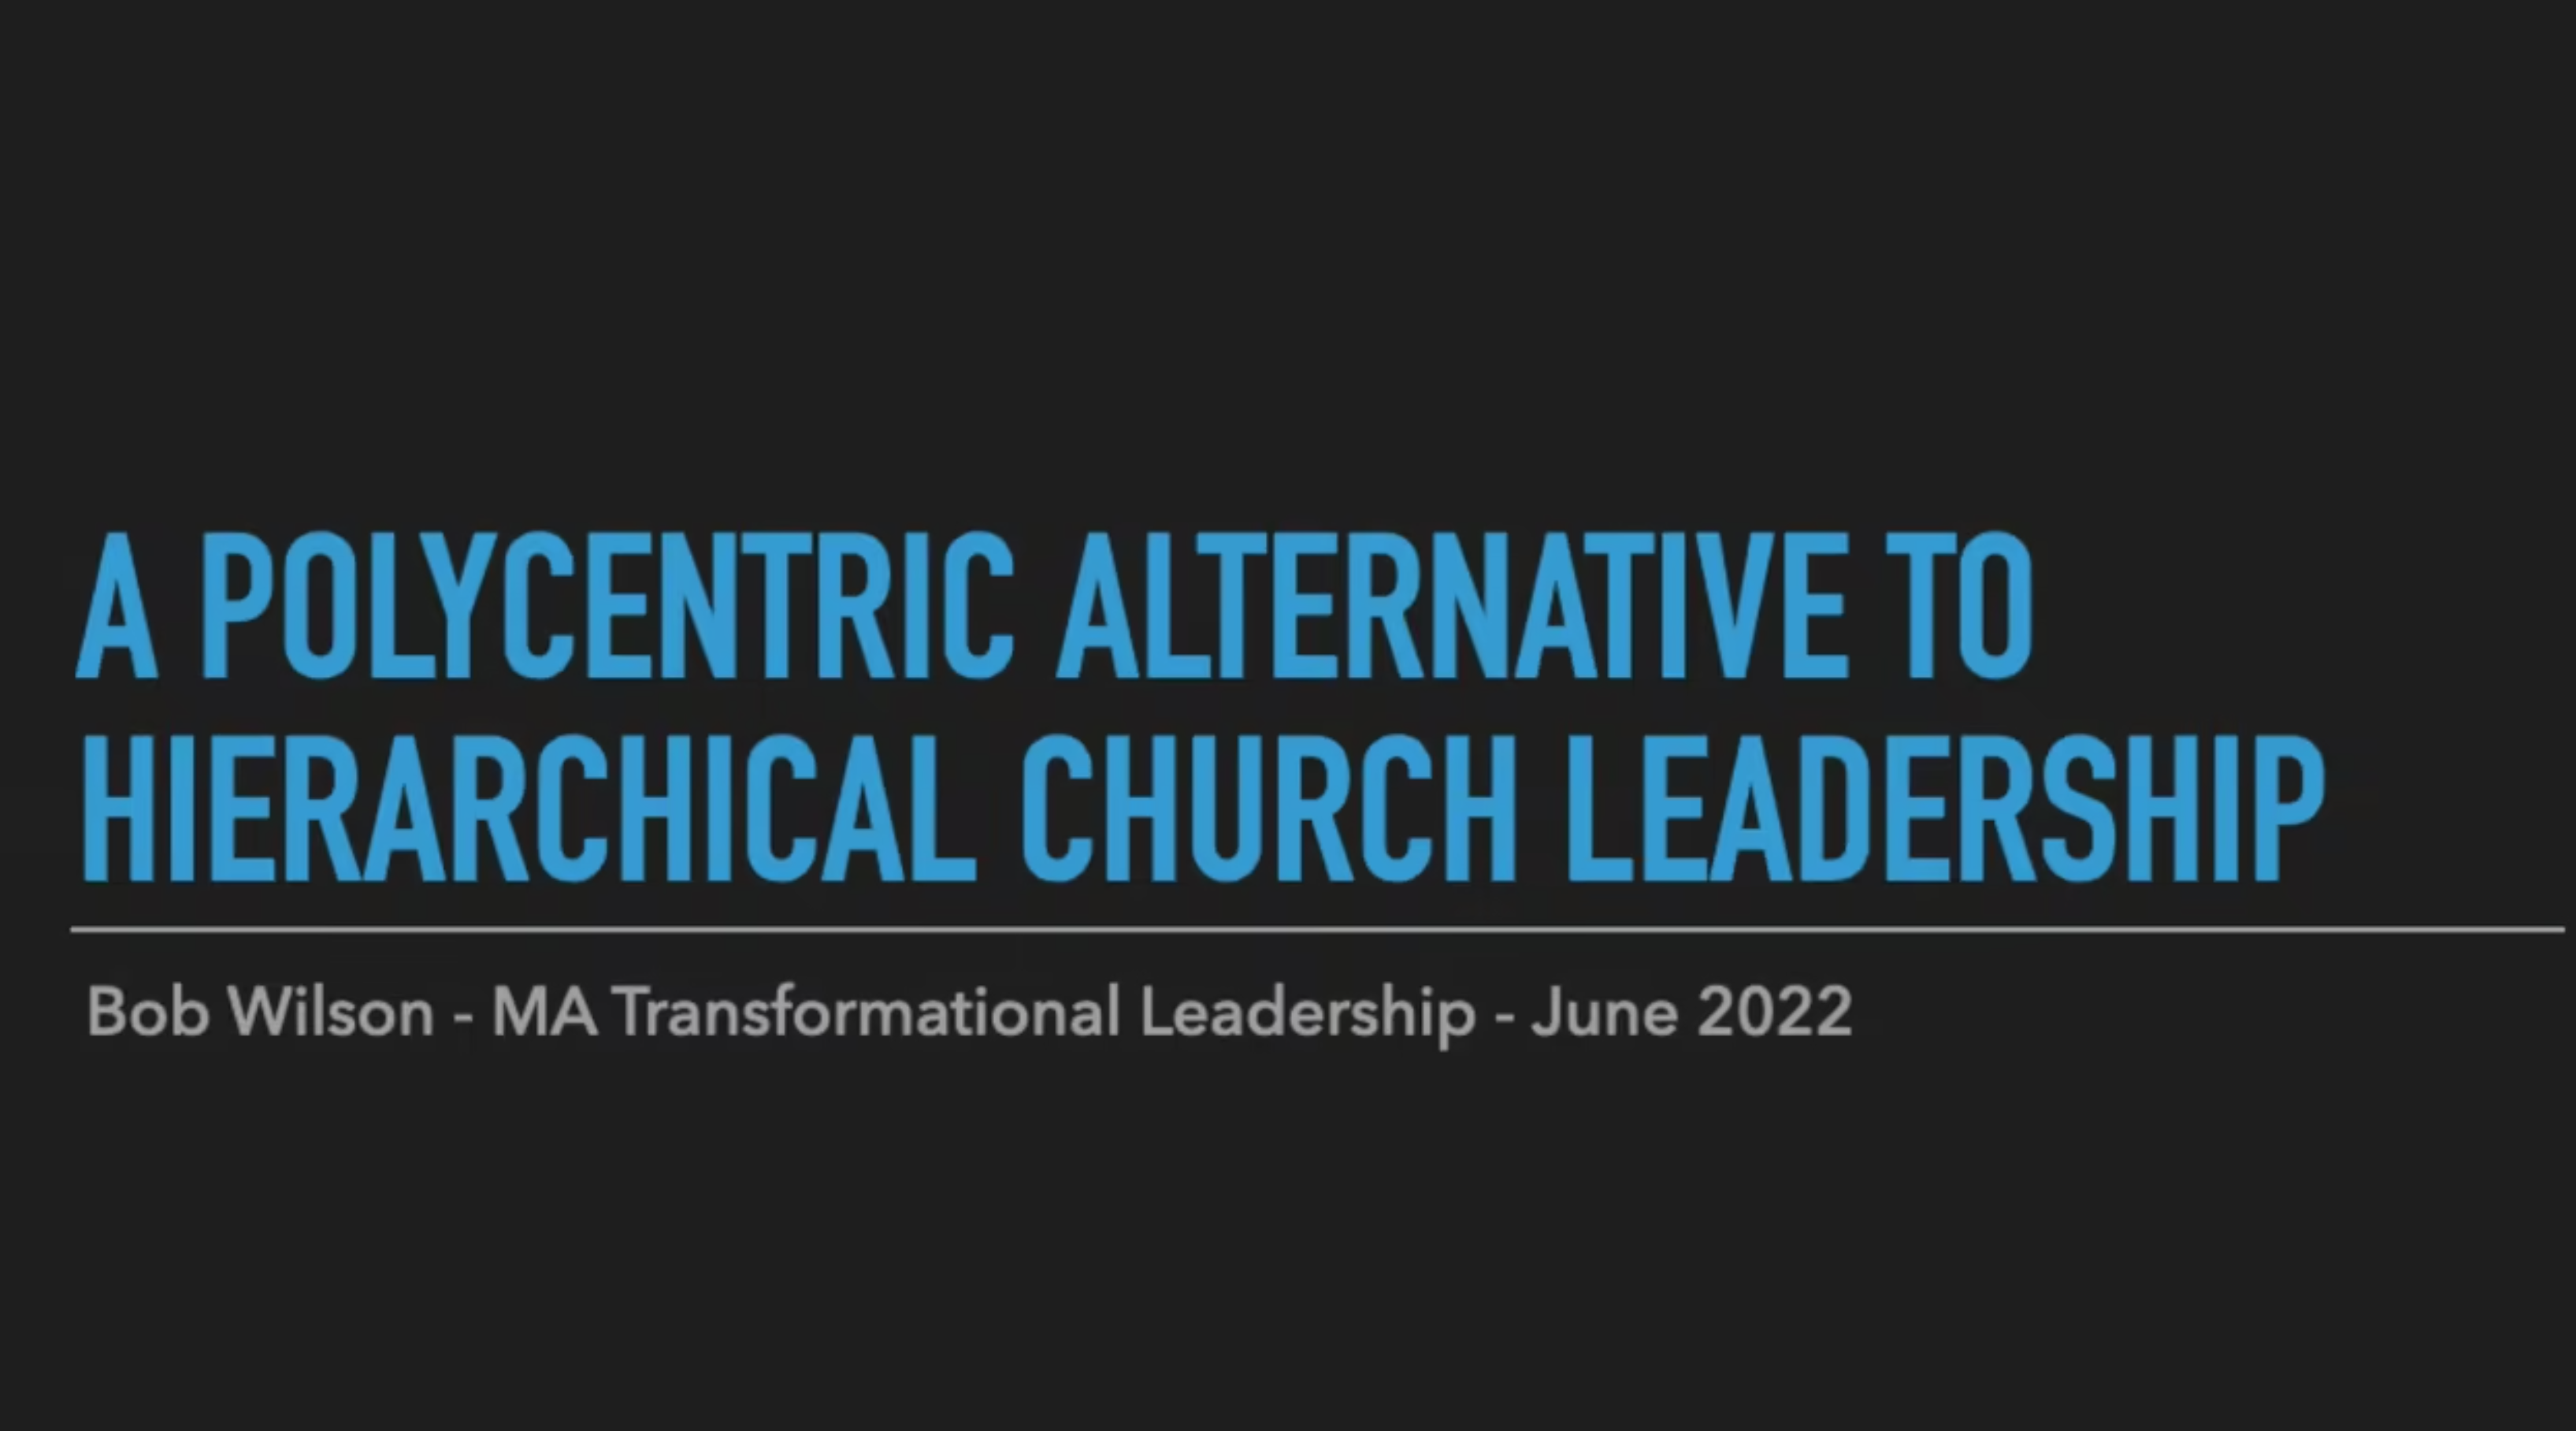 A Polycentric Alternative to Hierarchical Church Leadership